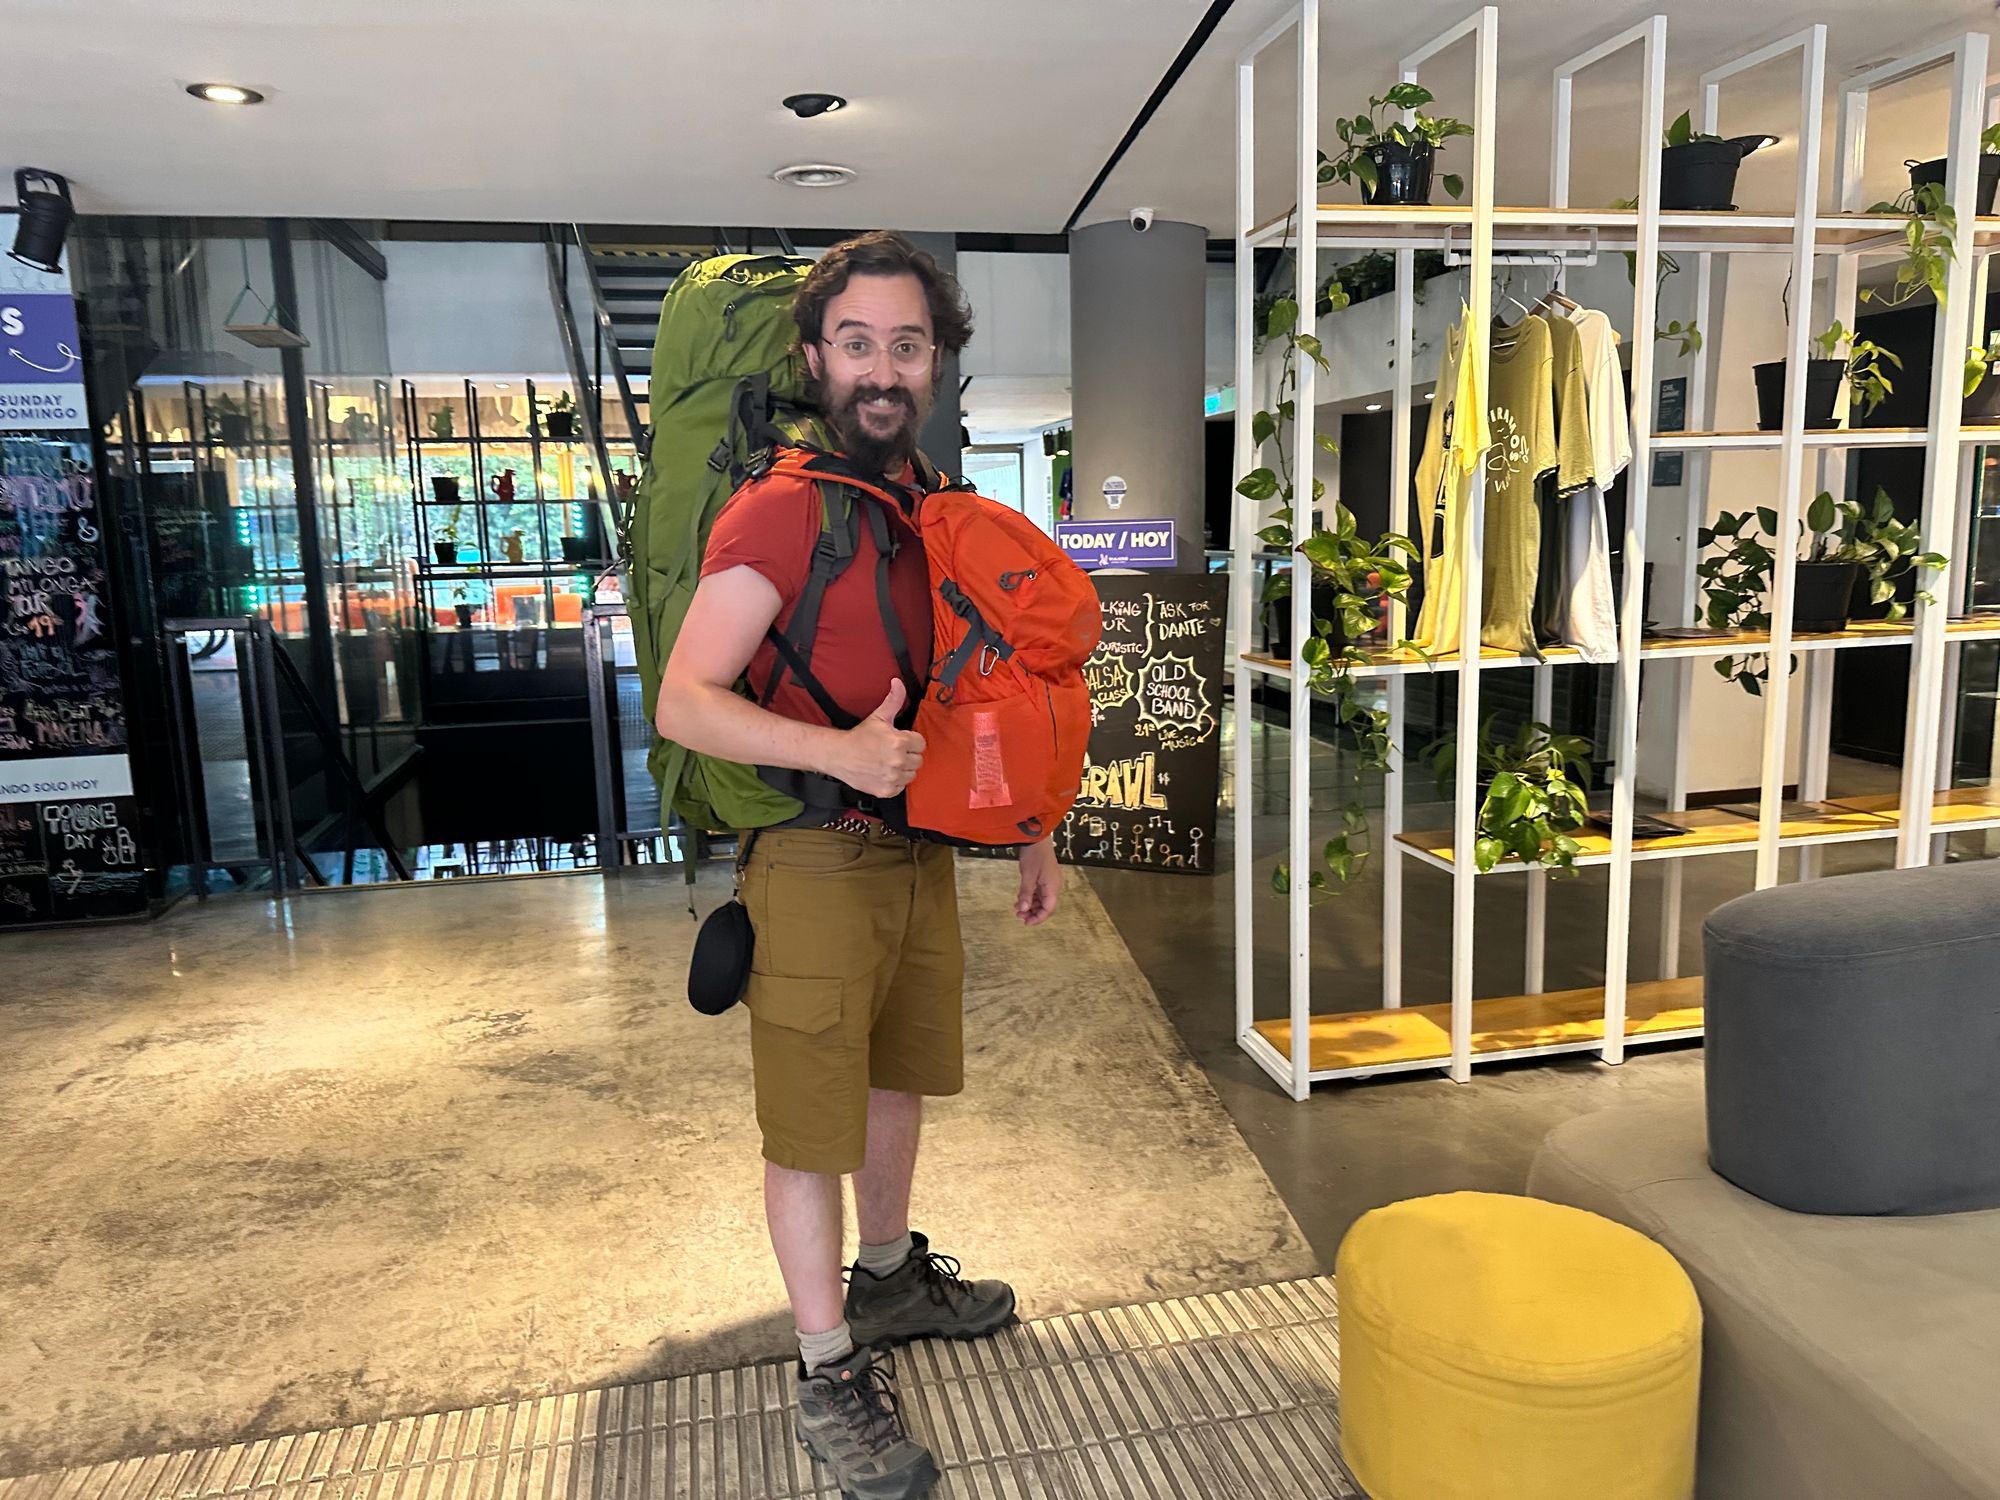 A photo of JP with both backpacks on, giving a thumbs up, in a hostel lobby.